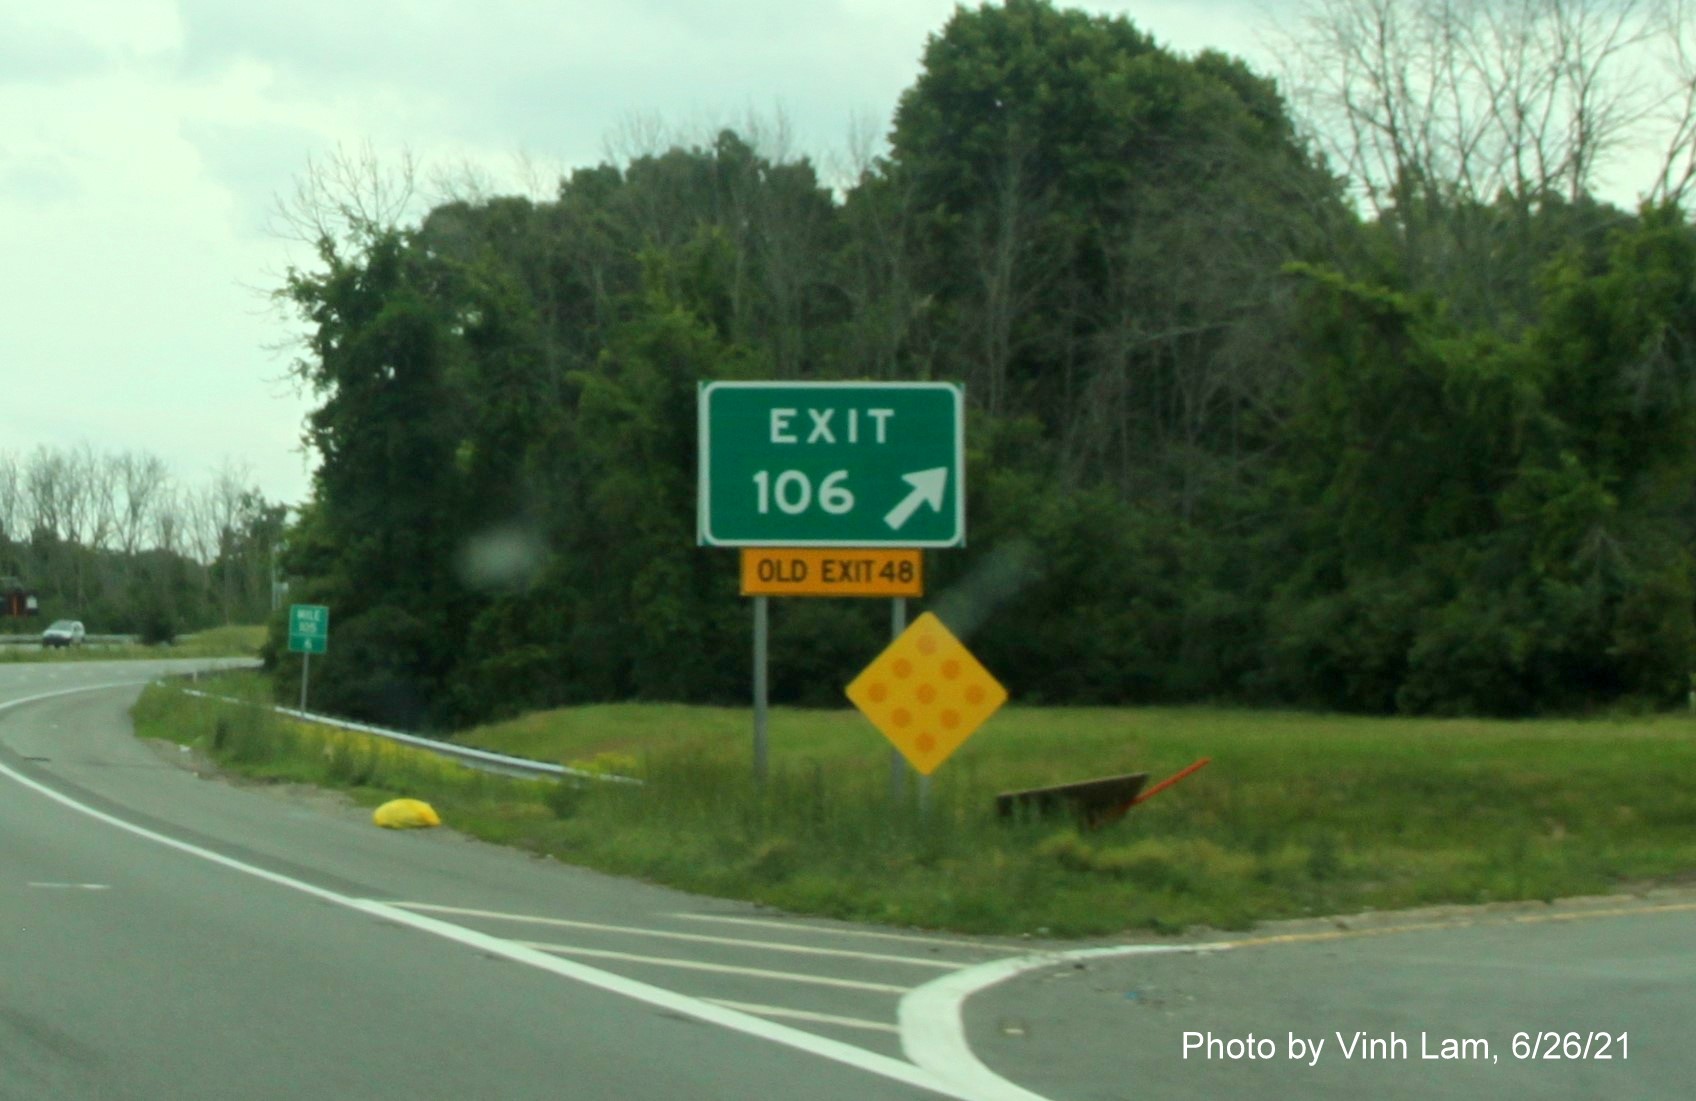 Image of gore sign for MA 125 exit with new milepost based exit number and yellow Old Exit 48 sign below on I-495 South in Lawrence, photo by Vinh Lam, June 2021